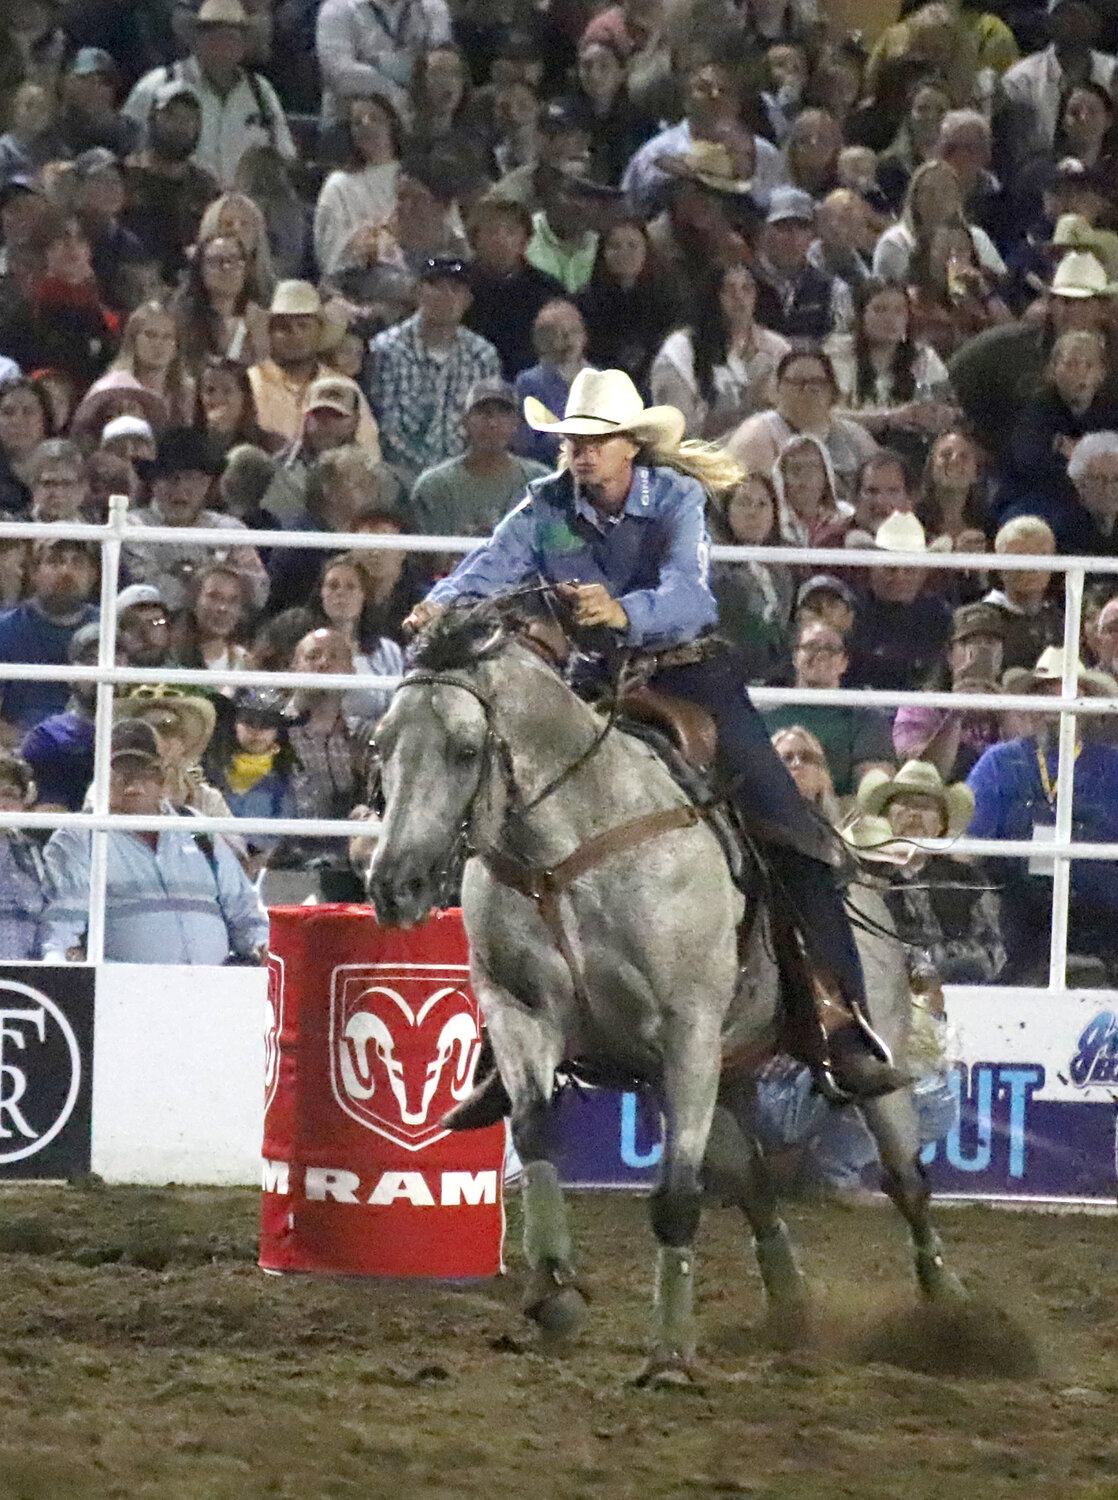 Barrel racing legend Sherry Cervi races around a barrel on her way to winning the ladies' barrel racing competition at Wednesday's Jim Baier/Dodge Ram Chute-Out kicking off the Tri-State Rodeo in Fort Madison.